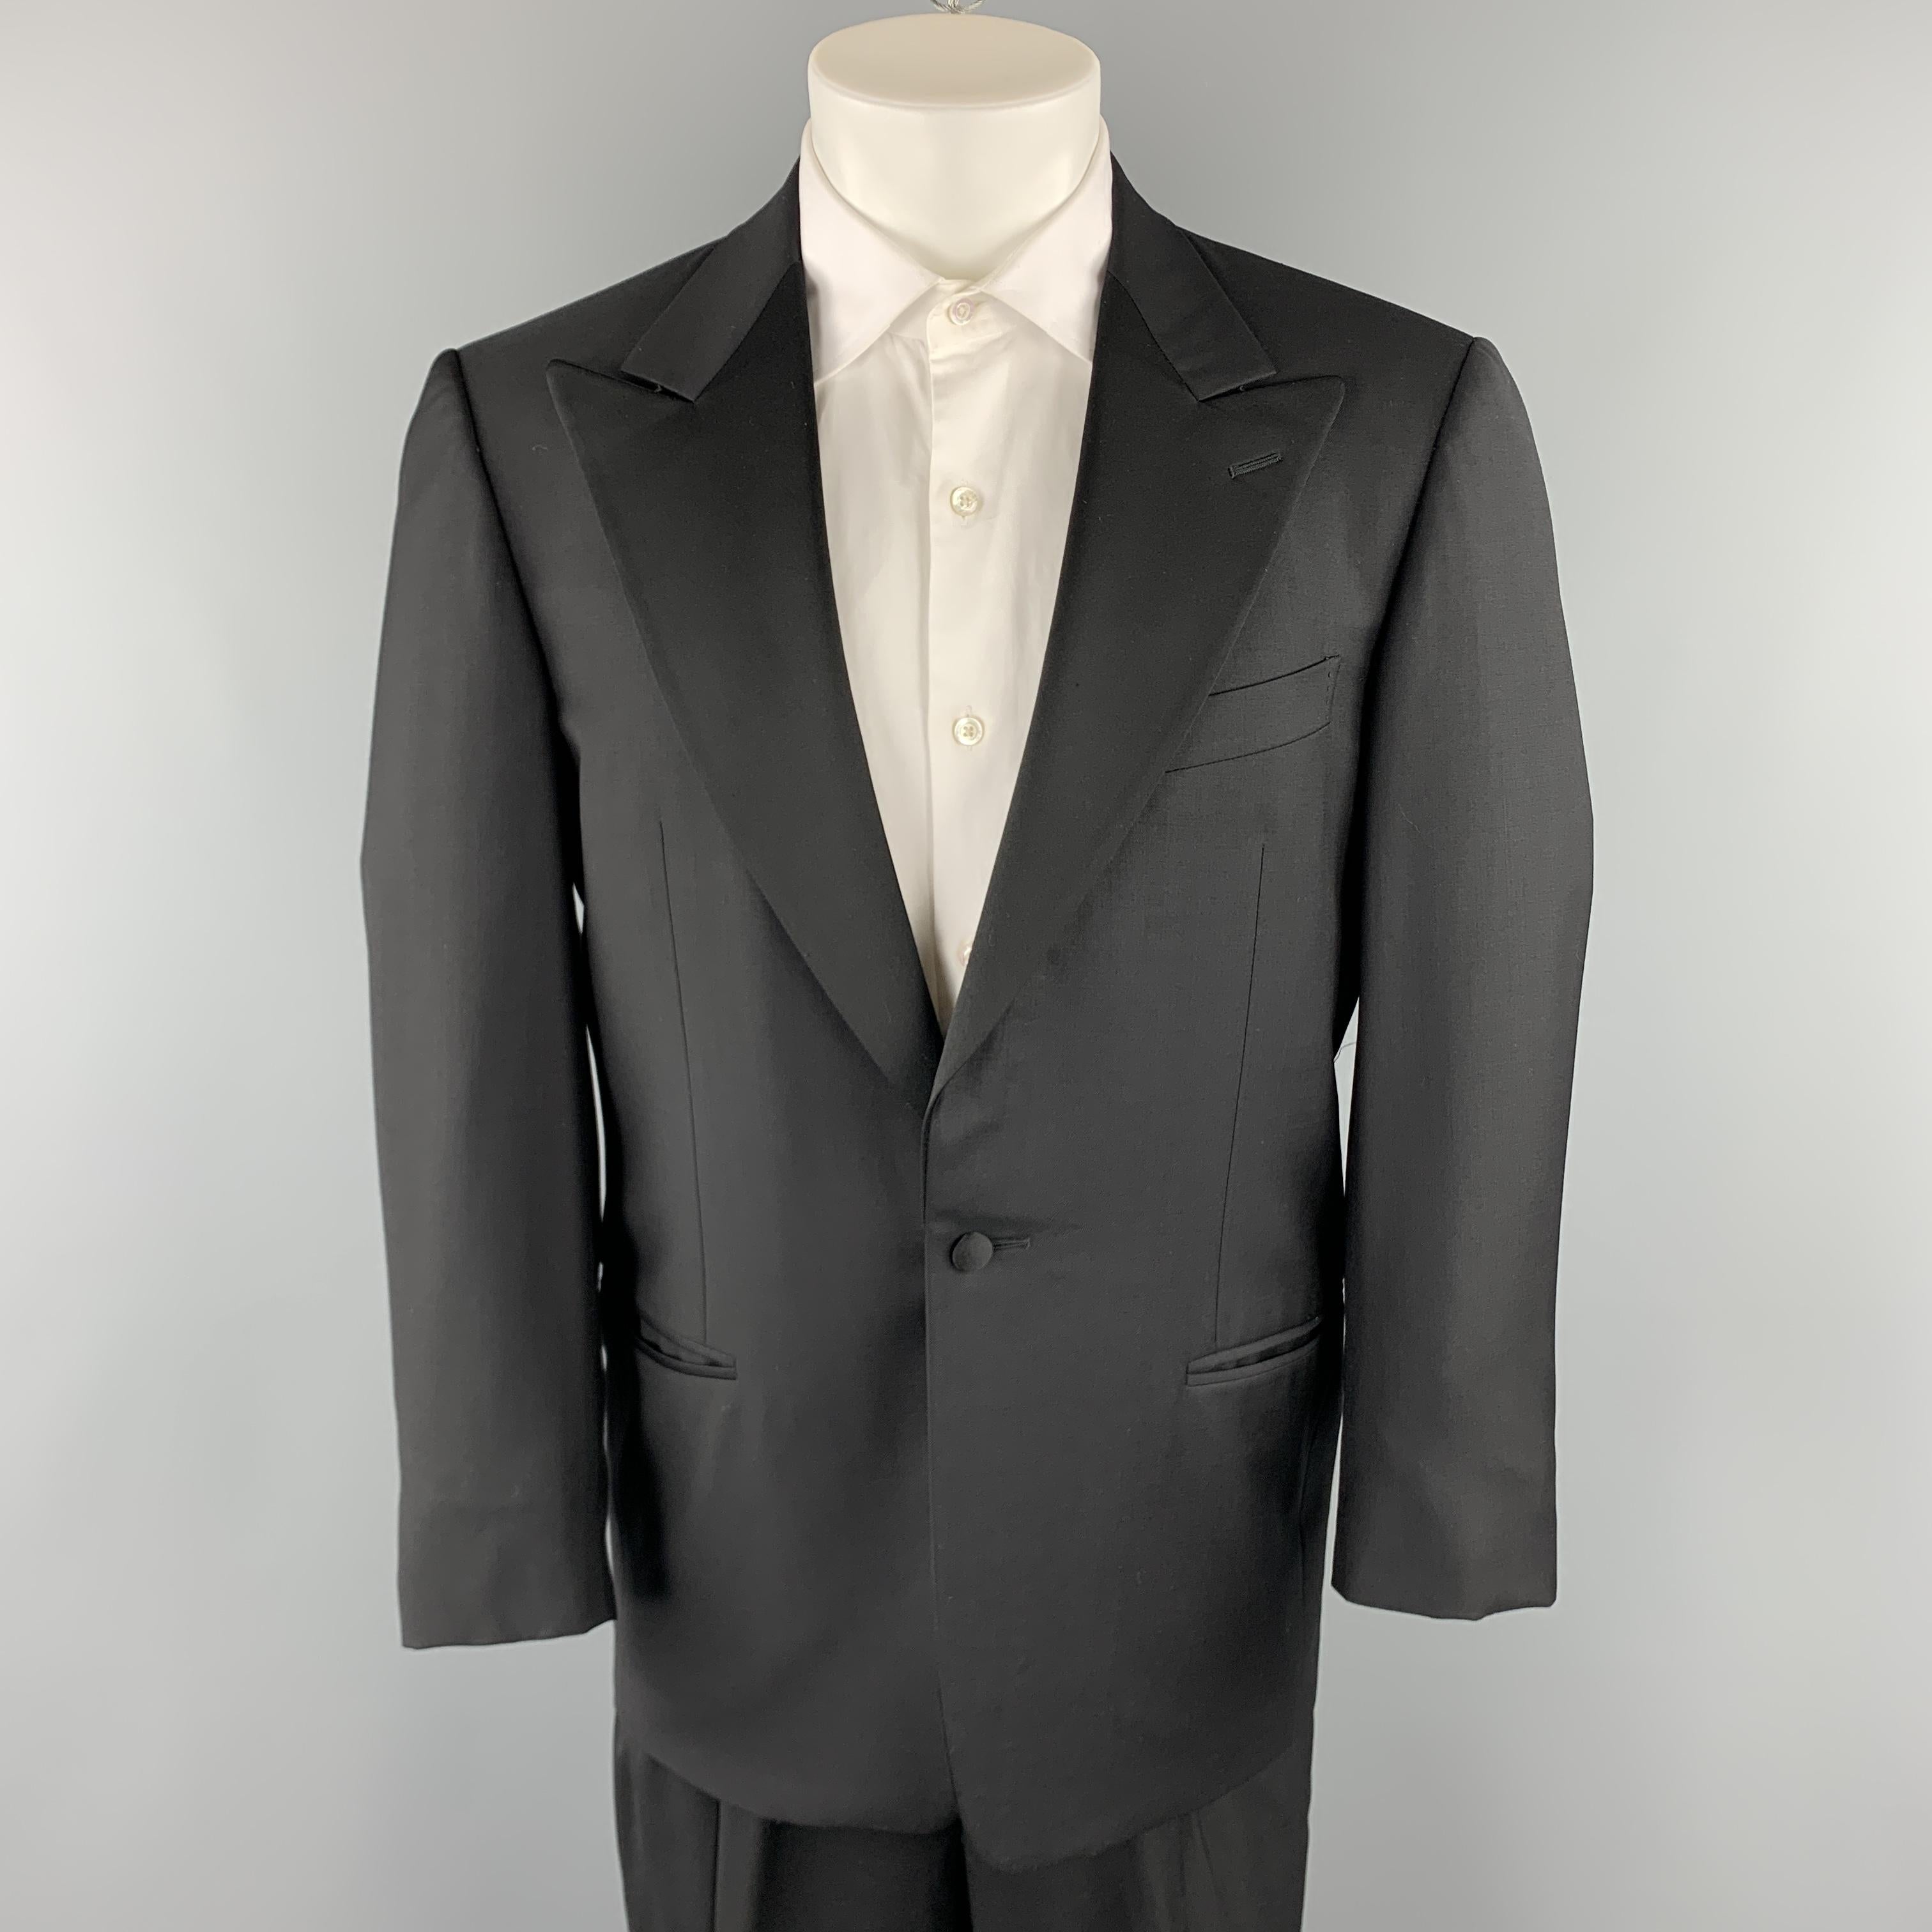 ERMENEGILDO ZEGNA short tuxedo suit comes in a black wool material and includes a single breasted, one button sport coat with a peak lapel and matching pleated front trousers. Made in Italy. 

Excellent Pre-Owned Condition.
Marked: Jacket IT 48,